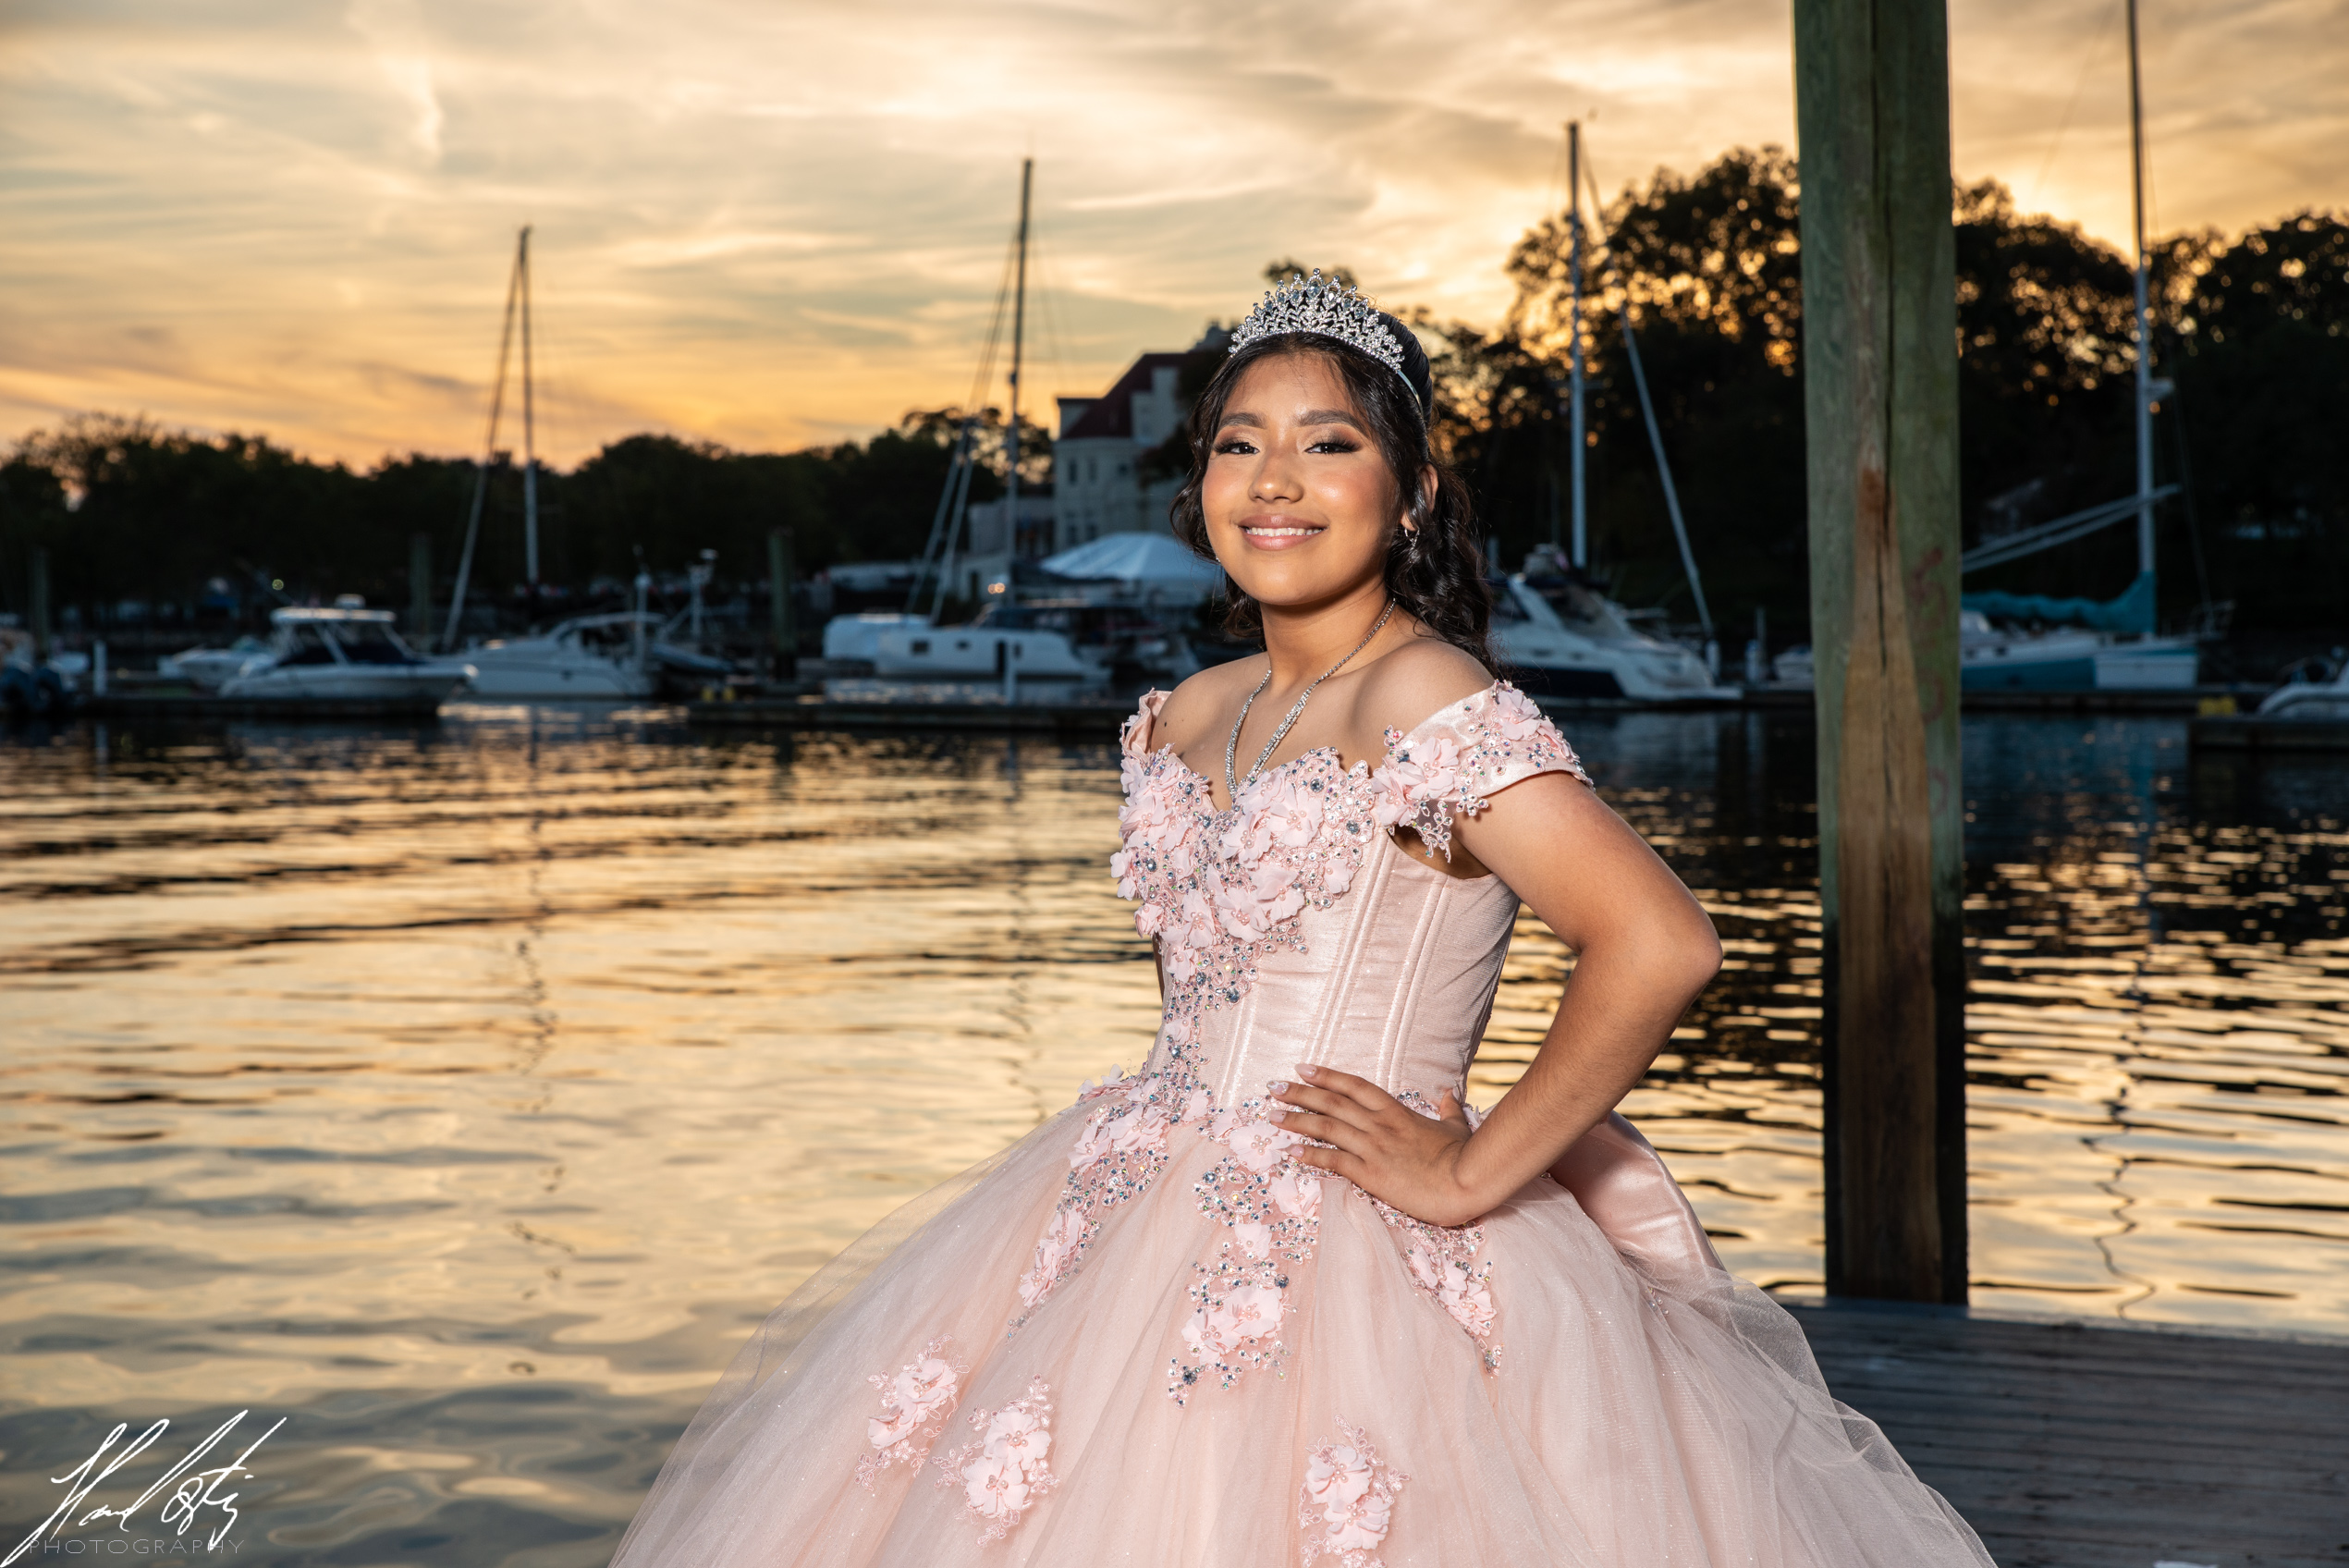 pink dress quinceañeras sweet15 photo hortizphotography and video bronx ny photographer Glen Island park New rochelle